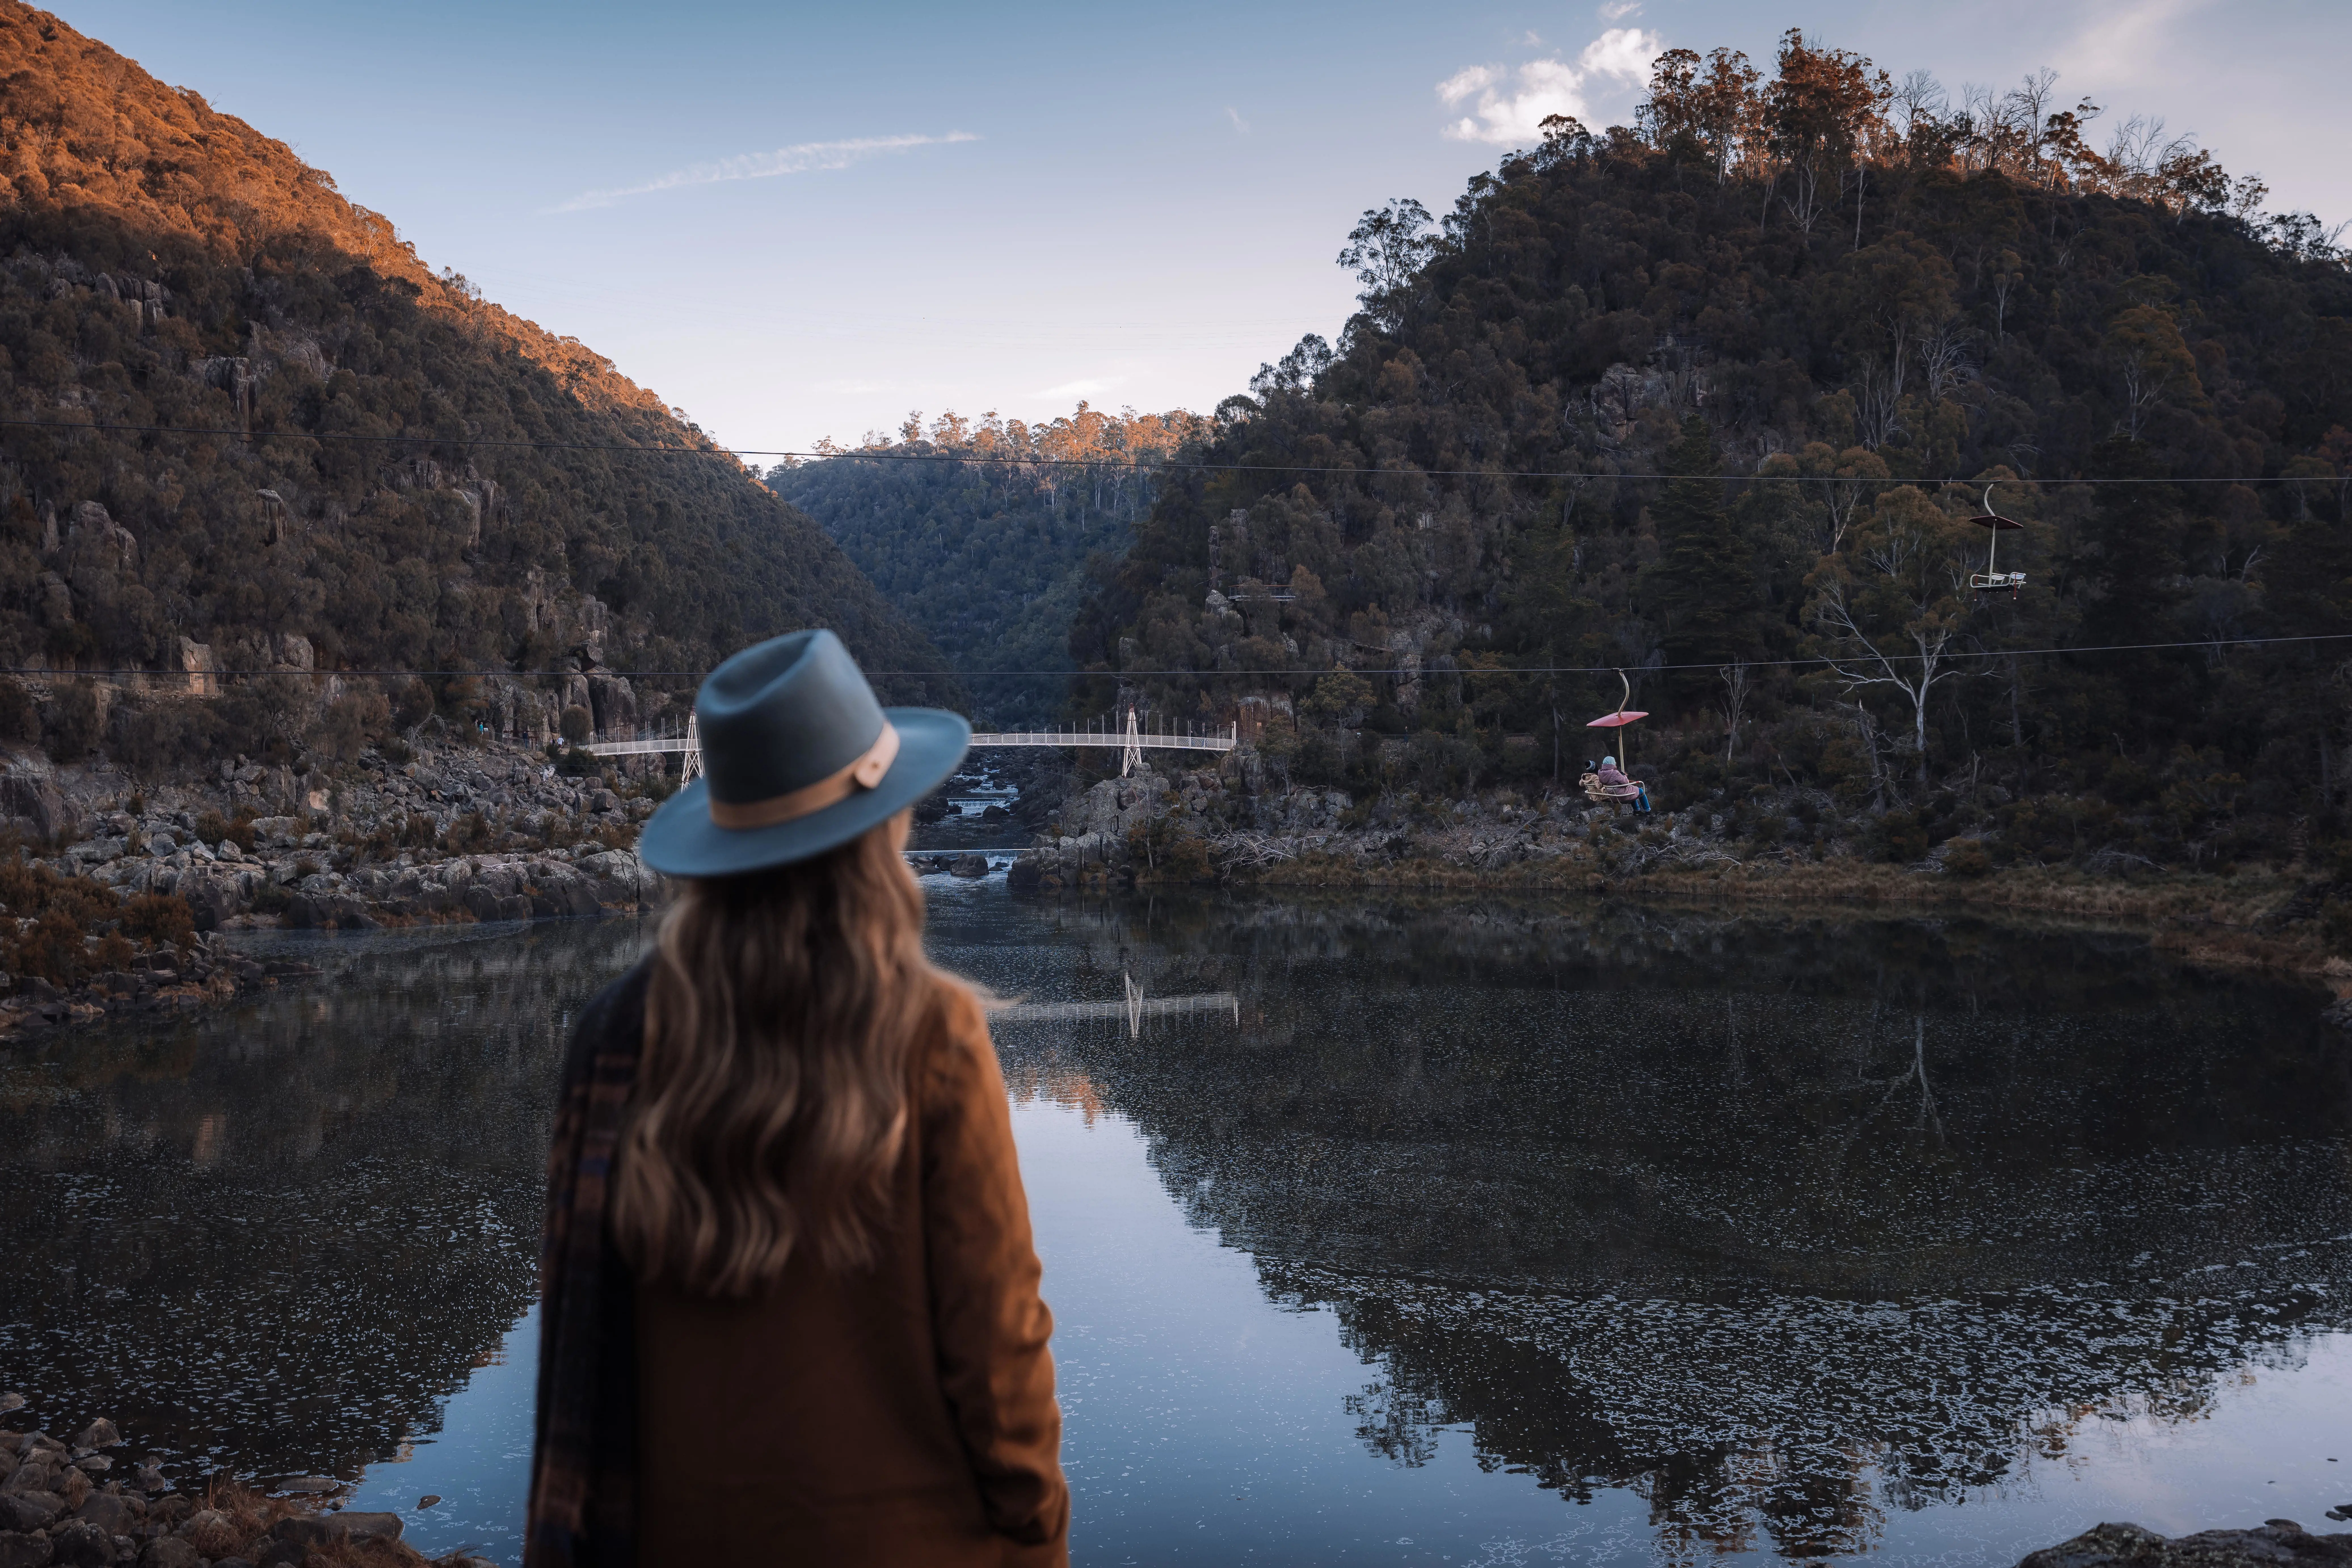 A young woman wearing a wide-brimmed hat looks out over the glassy water of Cataract Gorge.